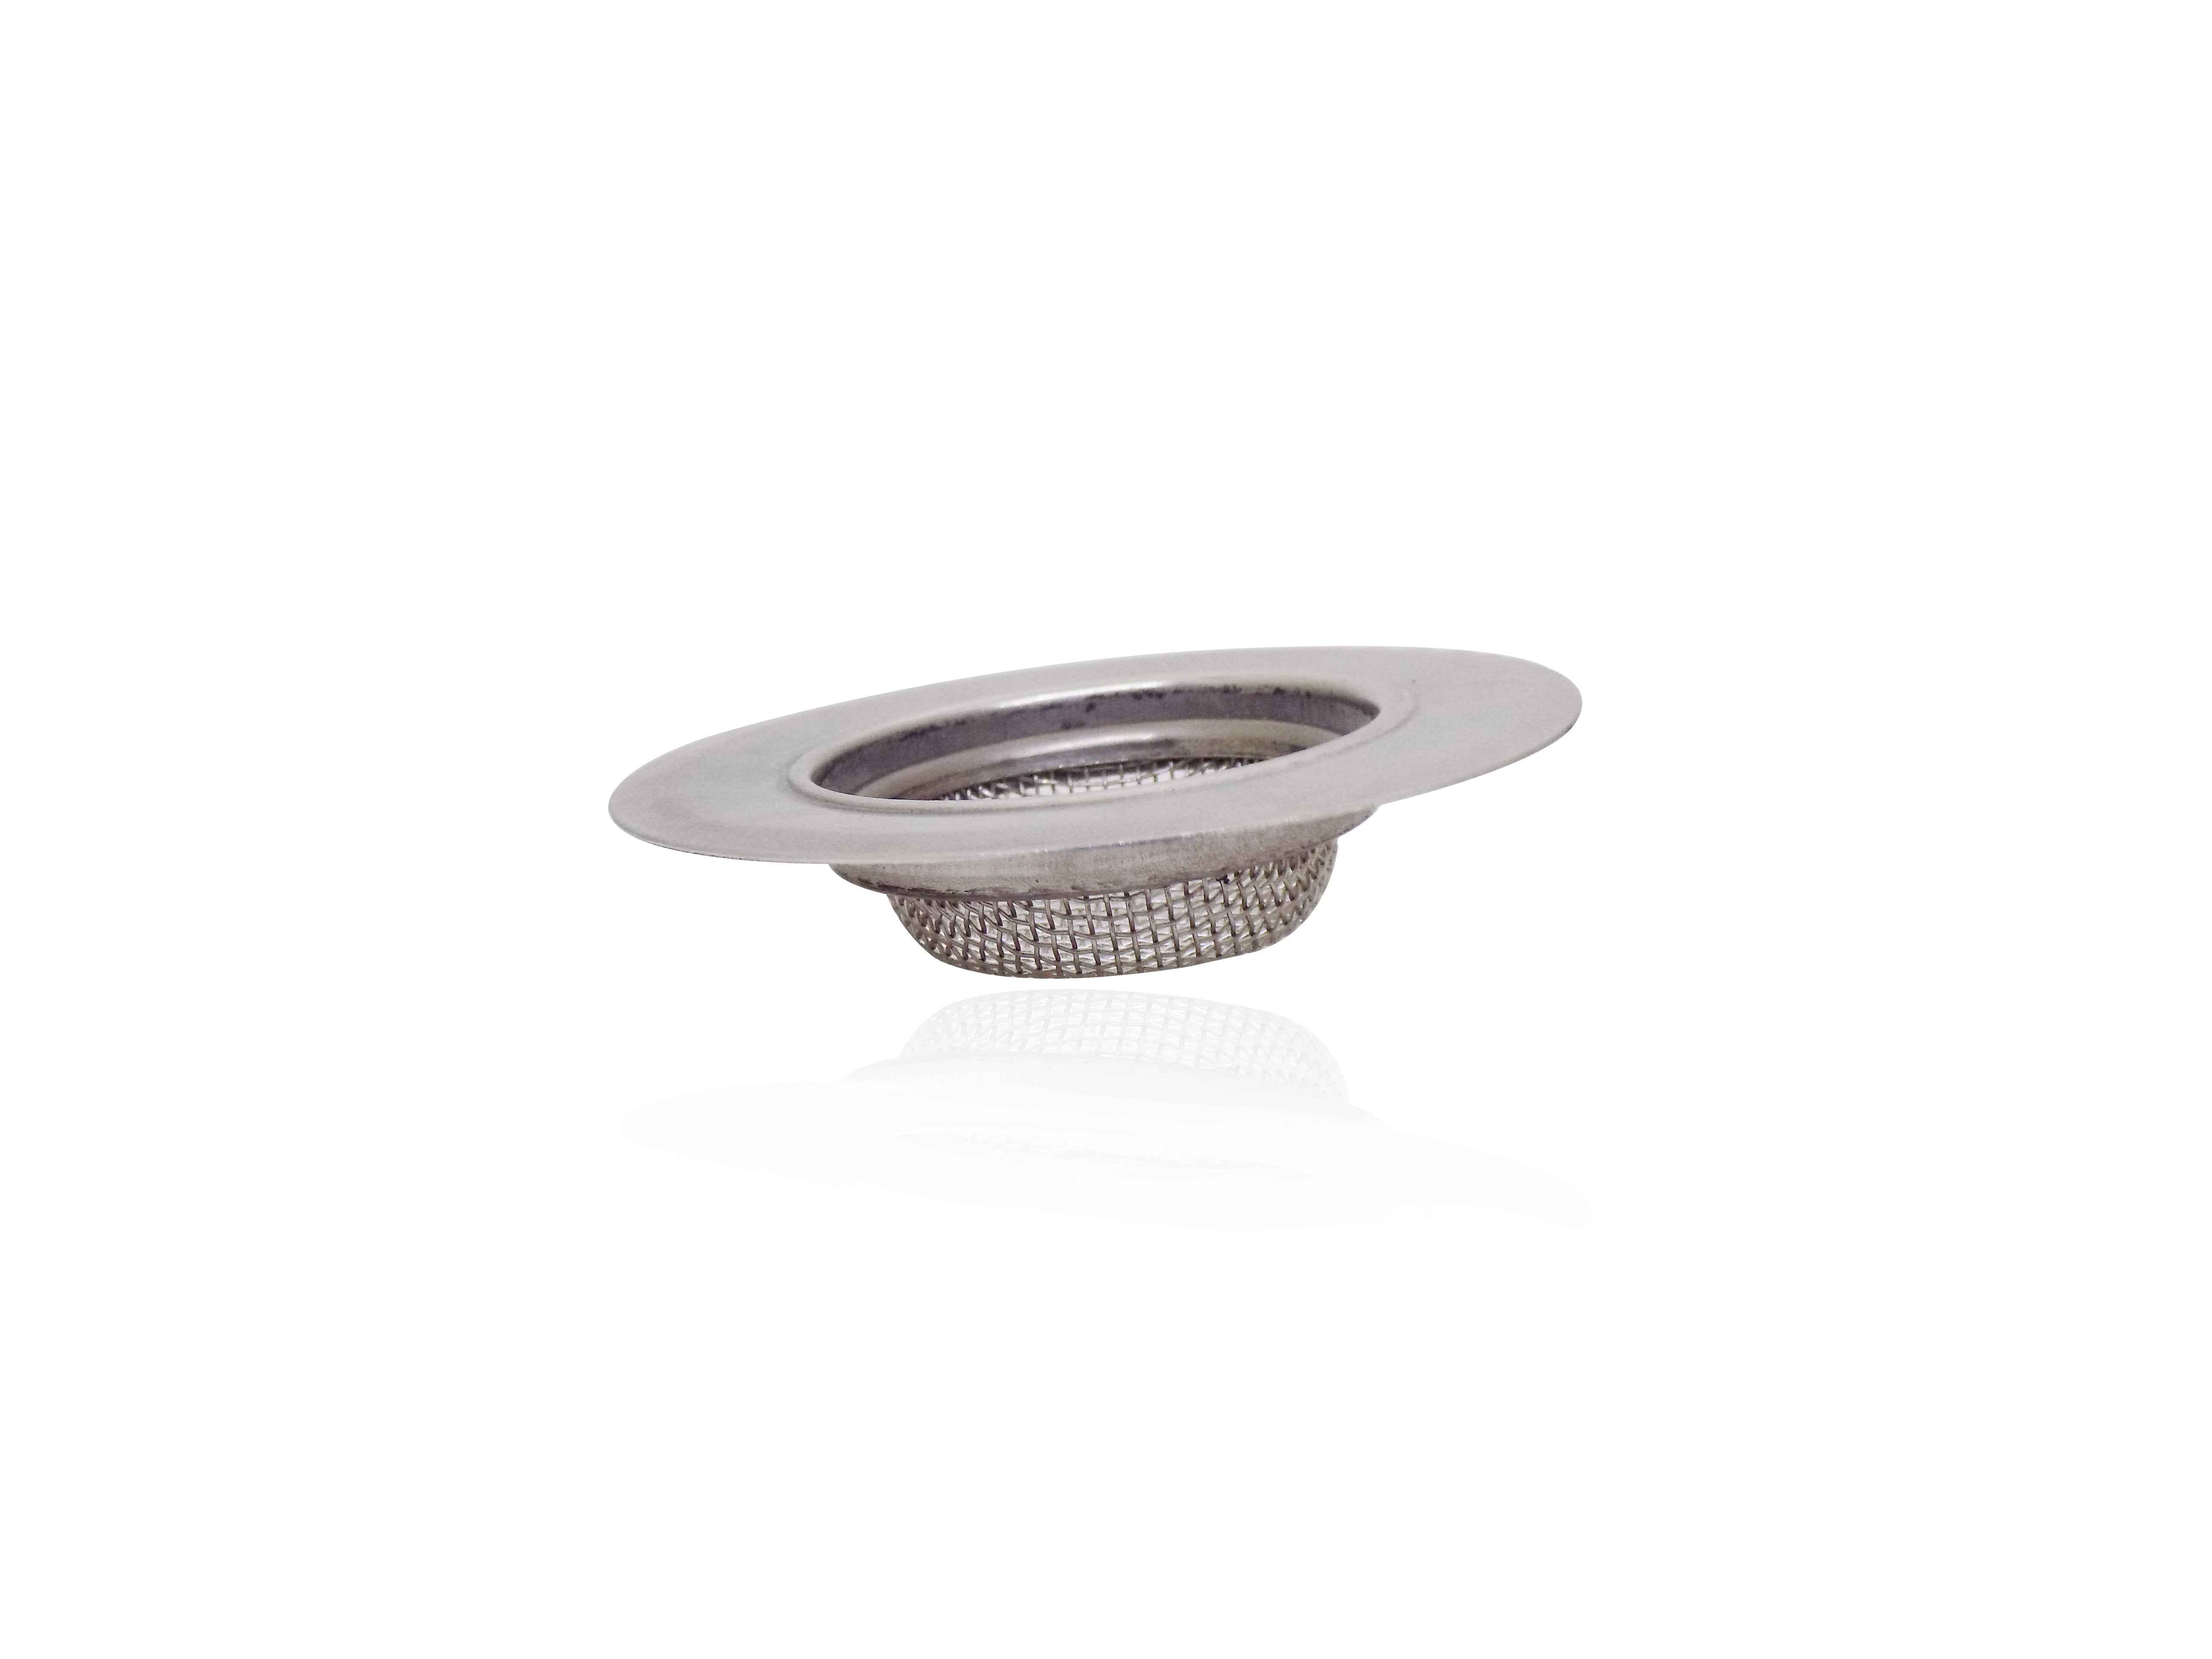 0792 Small Stainless Steel Sink/Wash Basin Drain Strainer - SkyShopy